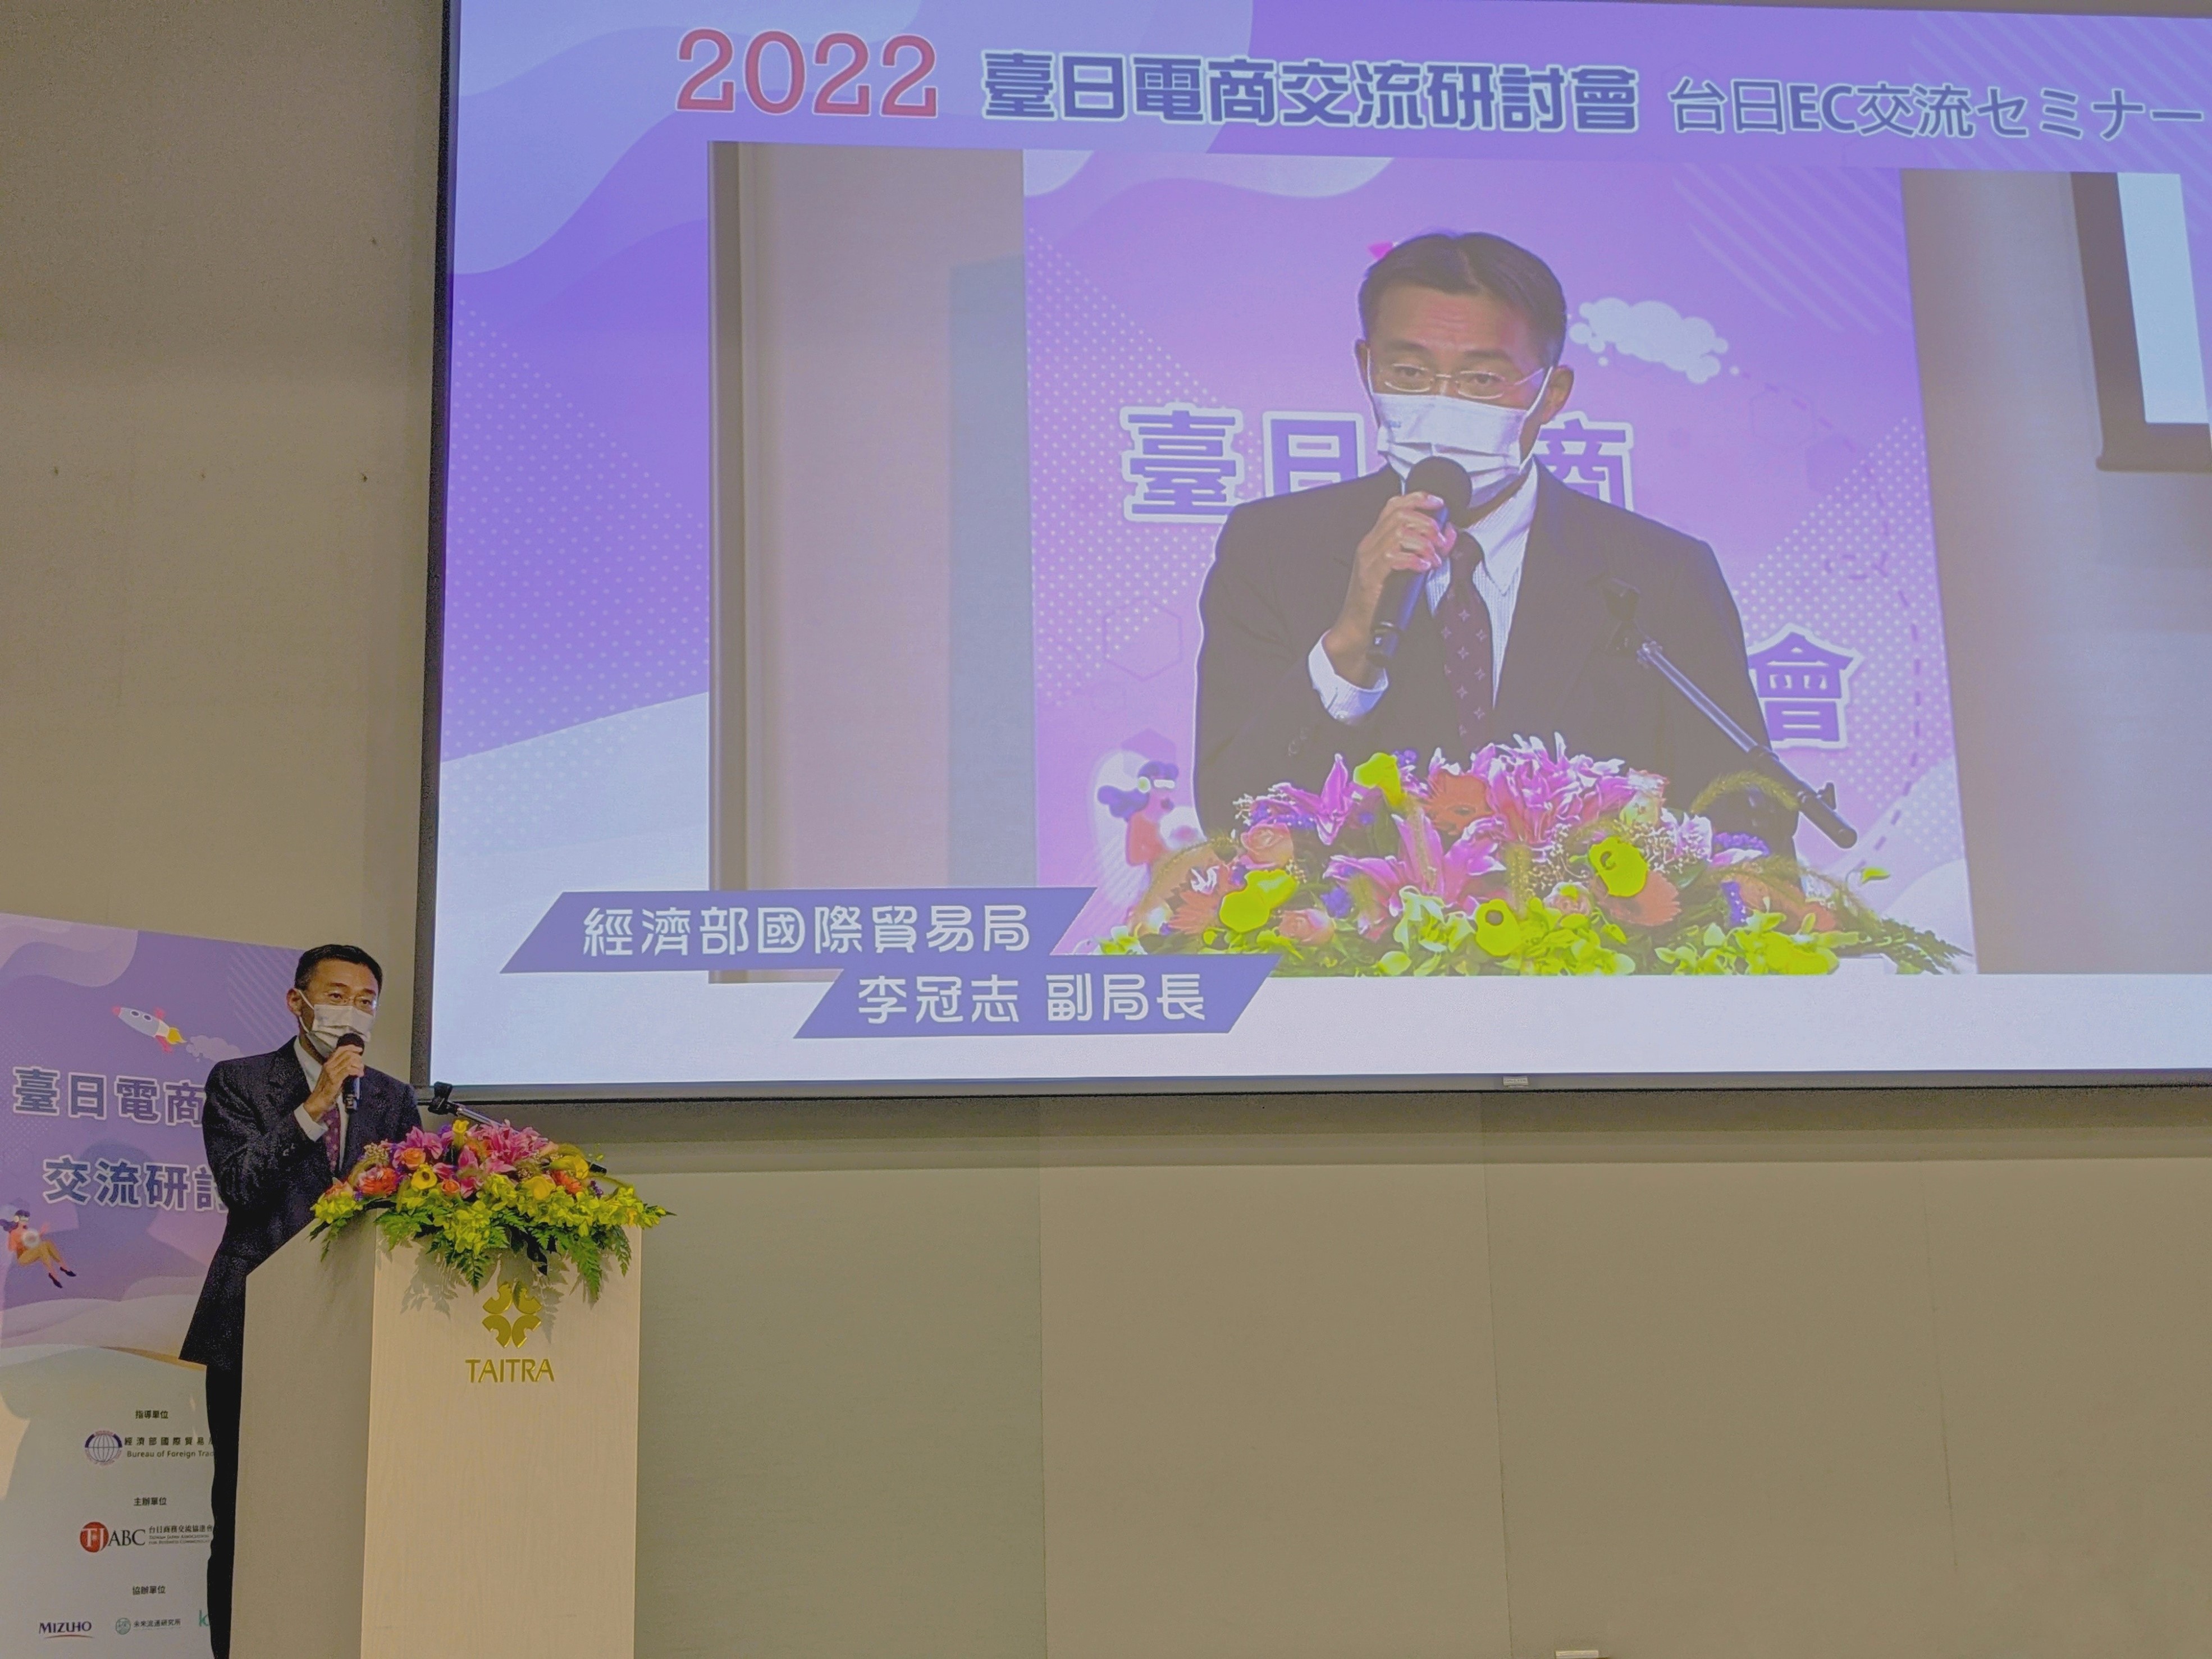 Deputy Director General Lee gives Opening Remarks at the 2022 Taiwan-Japan E-commerce Discussion Forum 